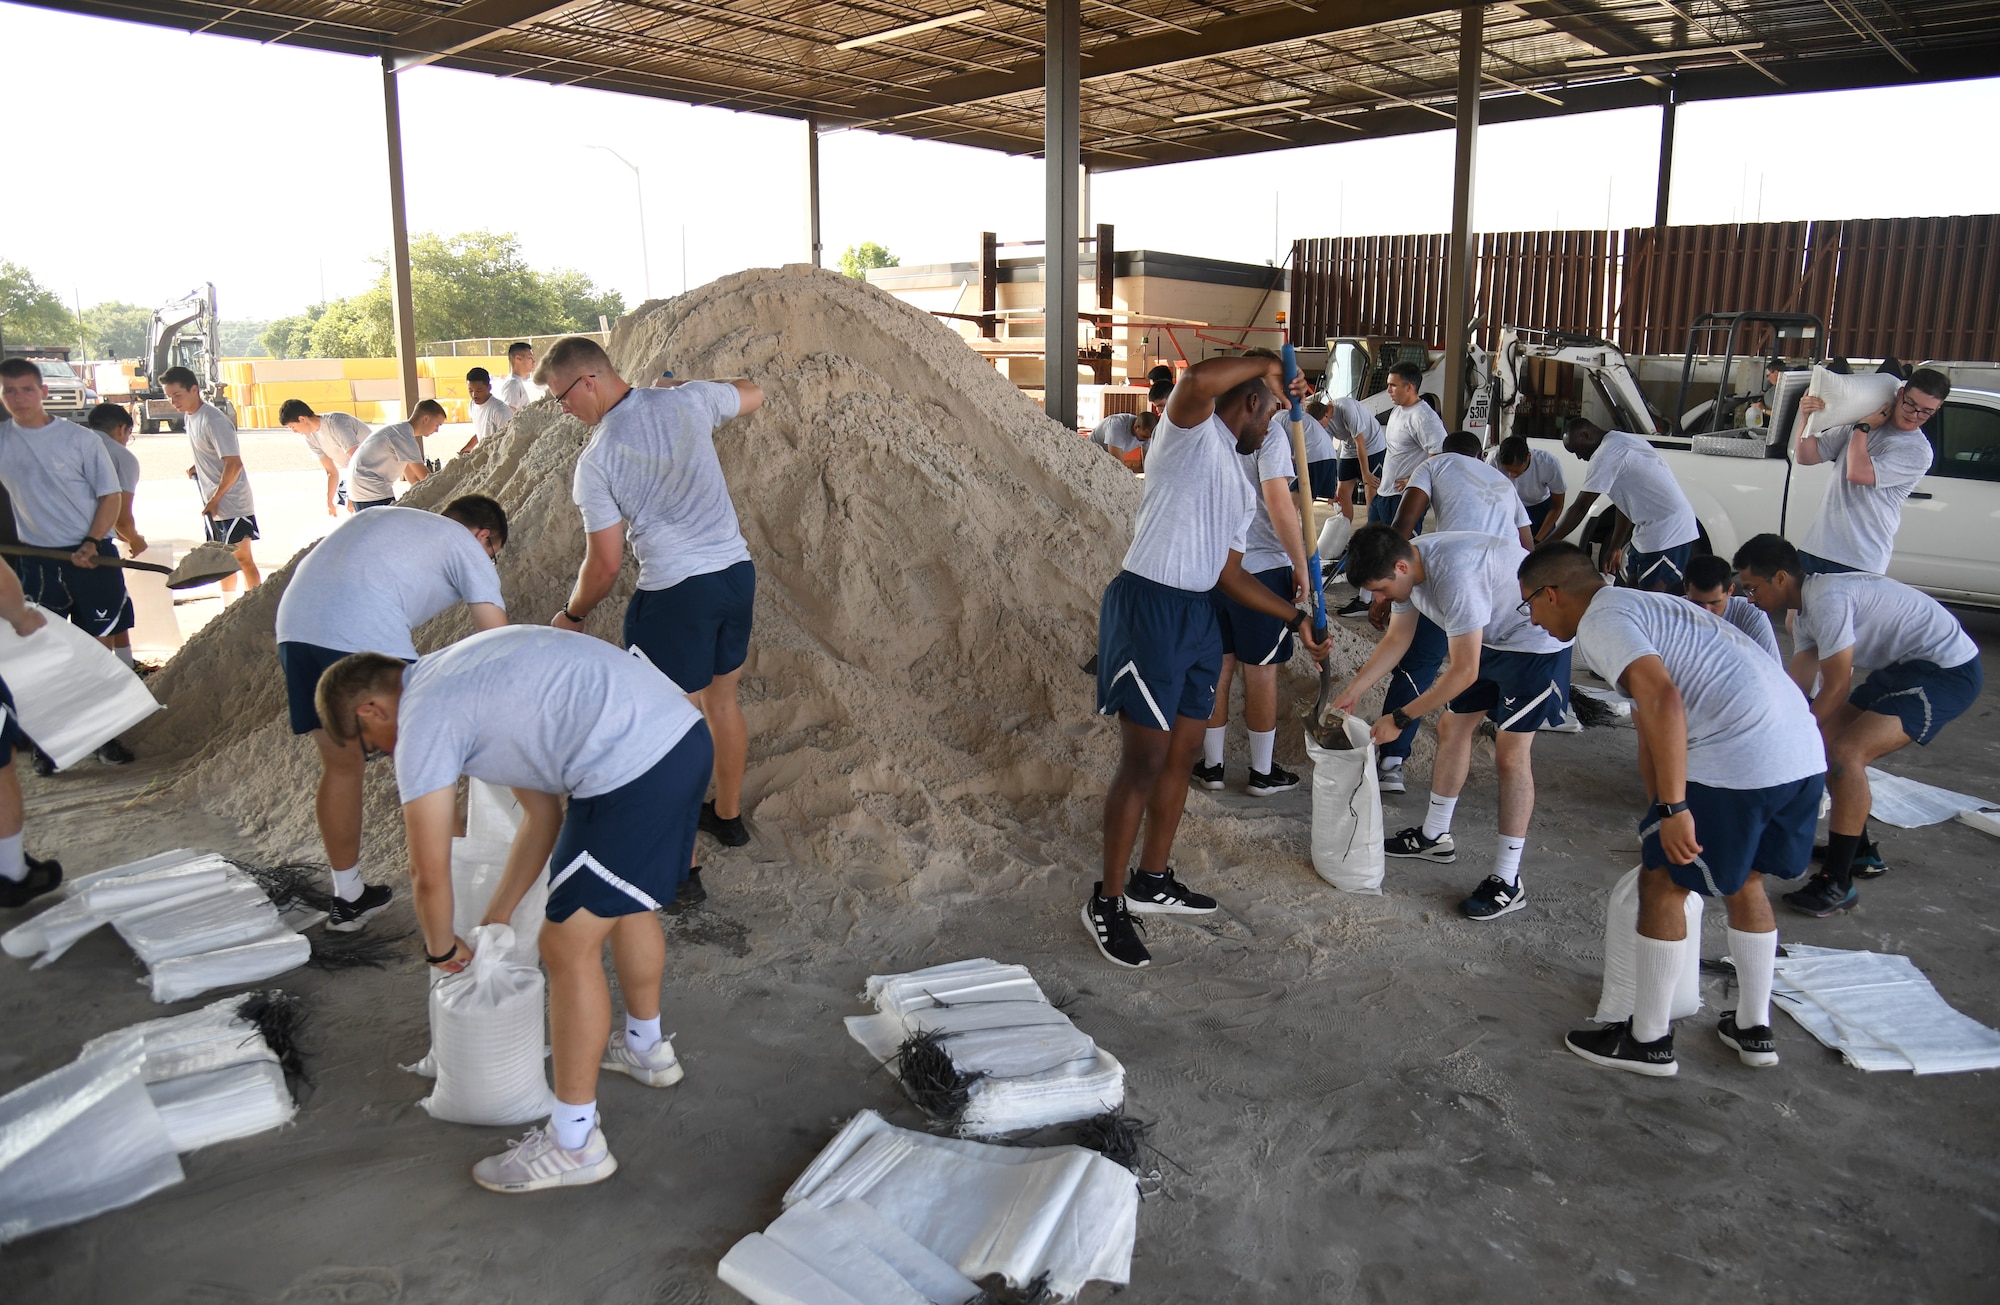 Airmen from the 338th Training Squadron fill sand bags in preparation for the 2022 hurricane season at Keesler Air Force Base, Mississippi, June 27, 2022. Over 40 Airmen assisted the 81st Civil Engineer Squadron with filling more than 2500 sand bags. Hurricane season runs from June 1 through November 30. (U.S. Air Force photo by Kemberly Groue)